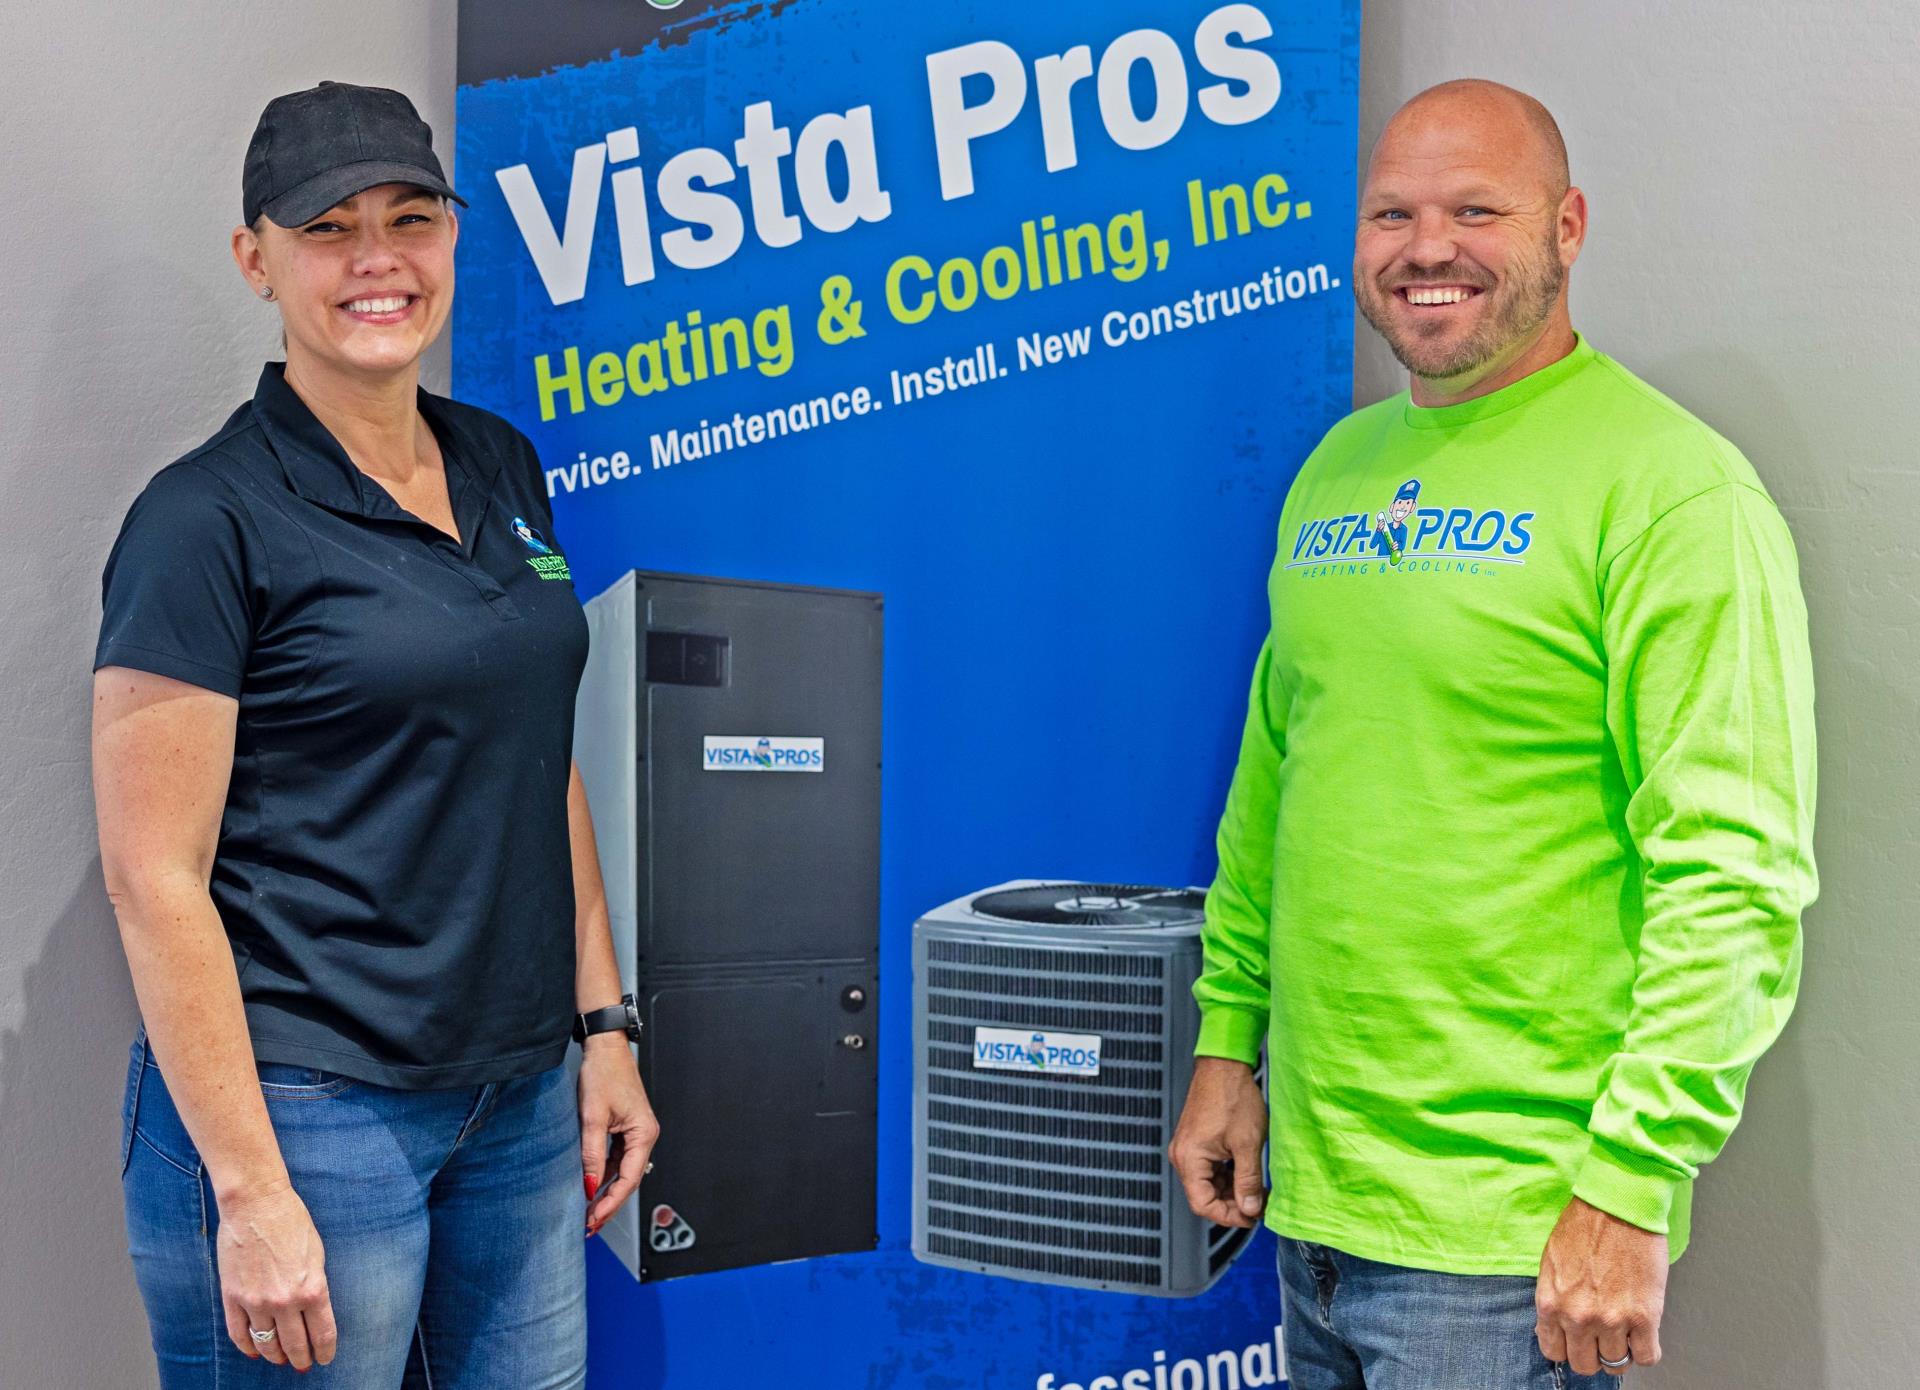 A woman and man stand in front of a Vista Pros banner